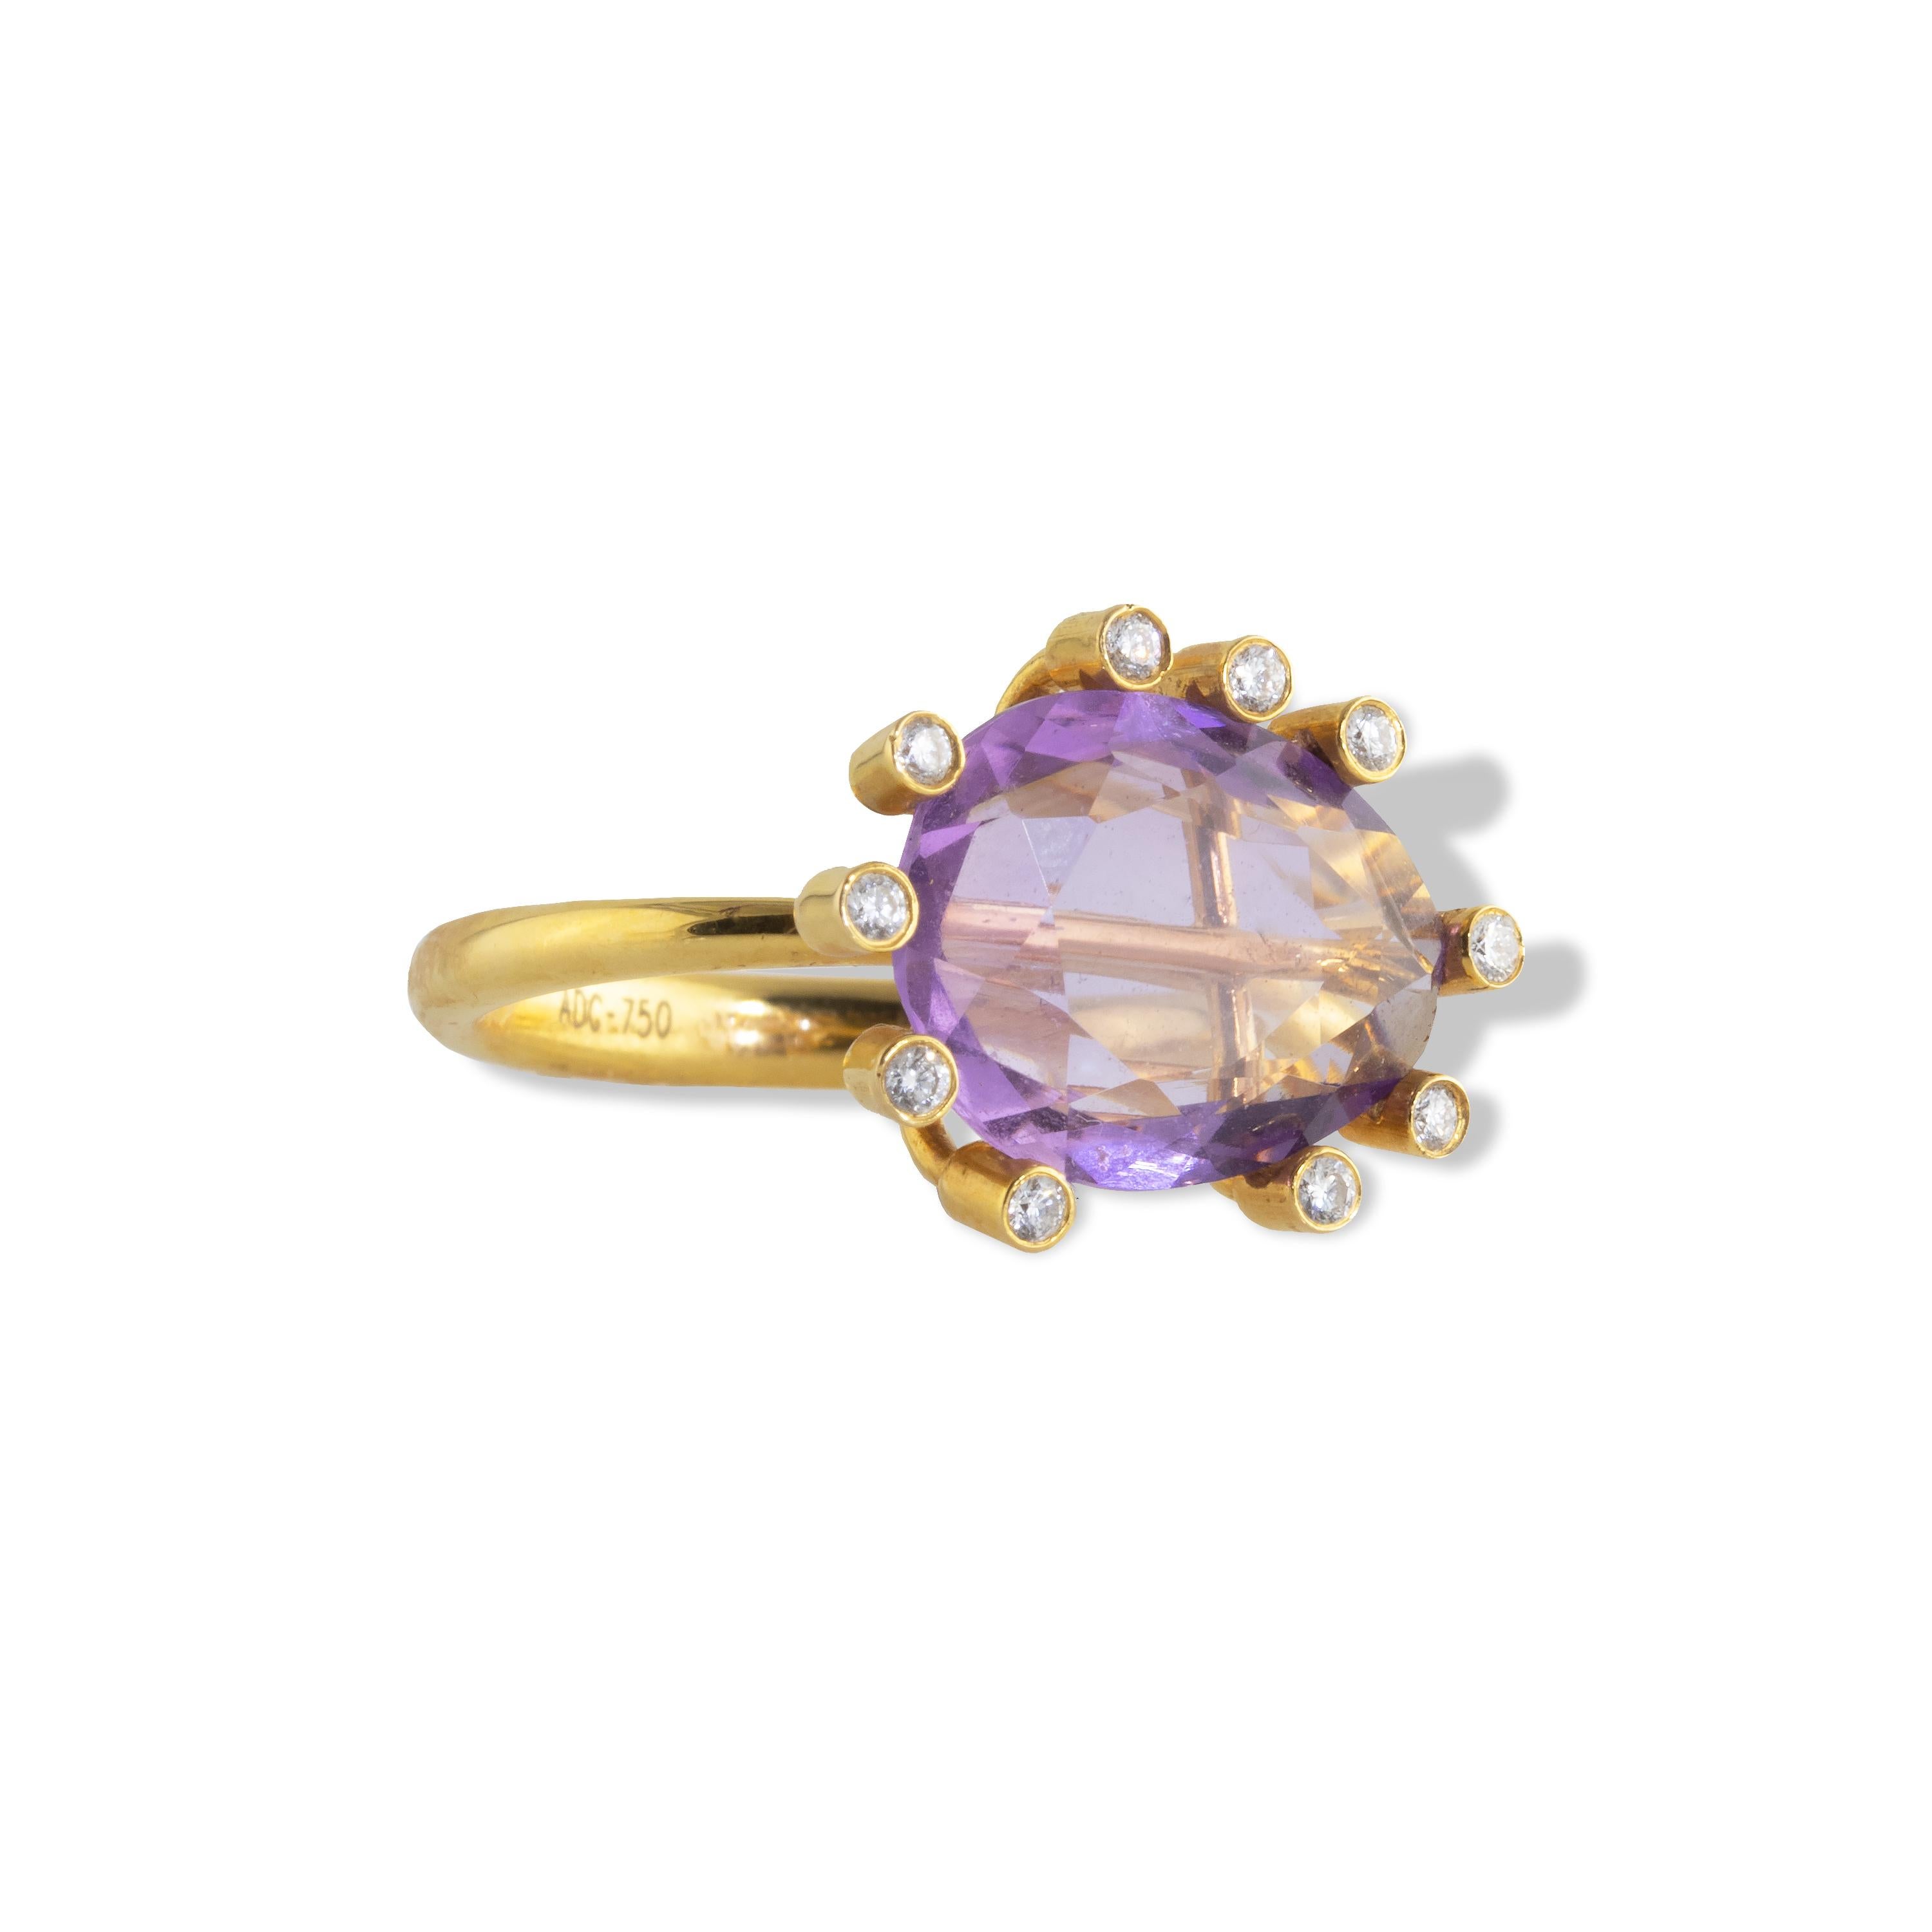 An elegant and dramatic ‘Open Cage’ ring with asymmetrical diamond clusters surrounding a large center 12 carat Amethyst gem. The concept for this piece came from a cage collection and represents an open cage construction with the cage showing